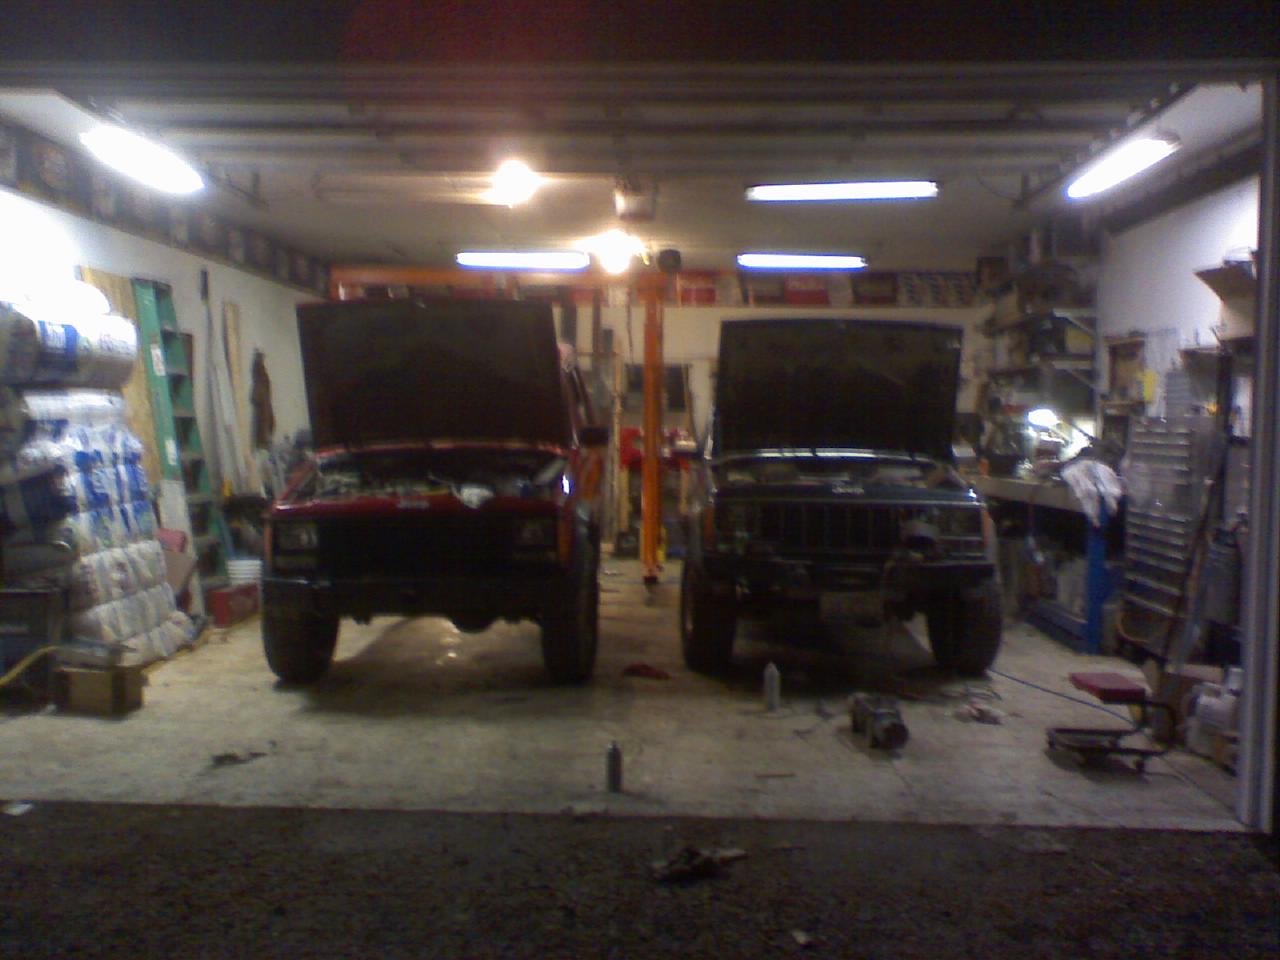 Working on them before an offroad trip